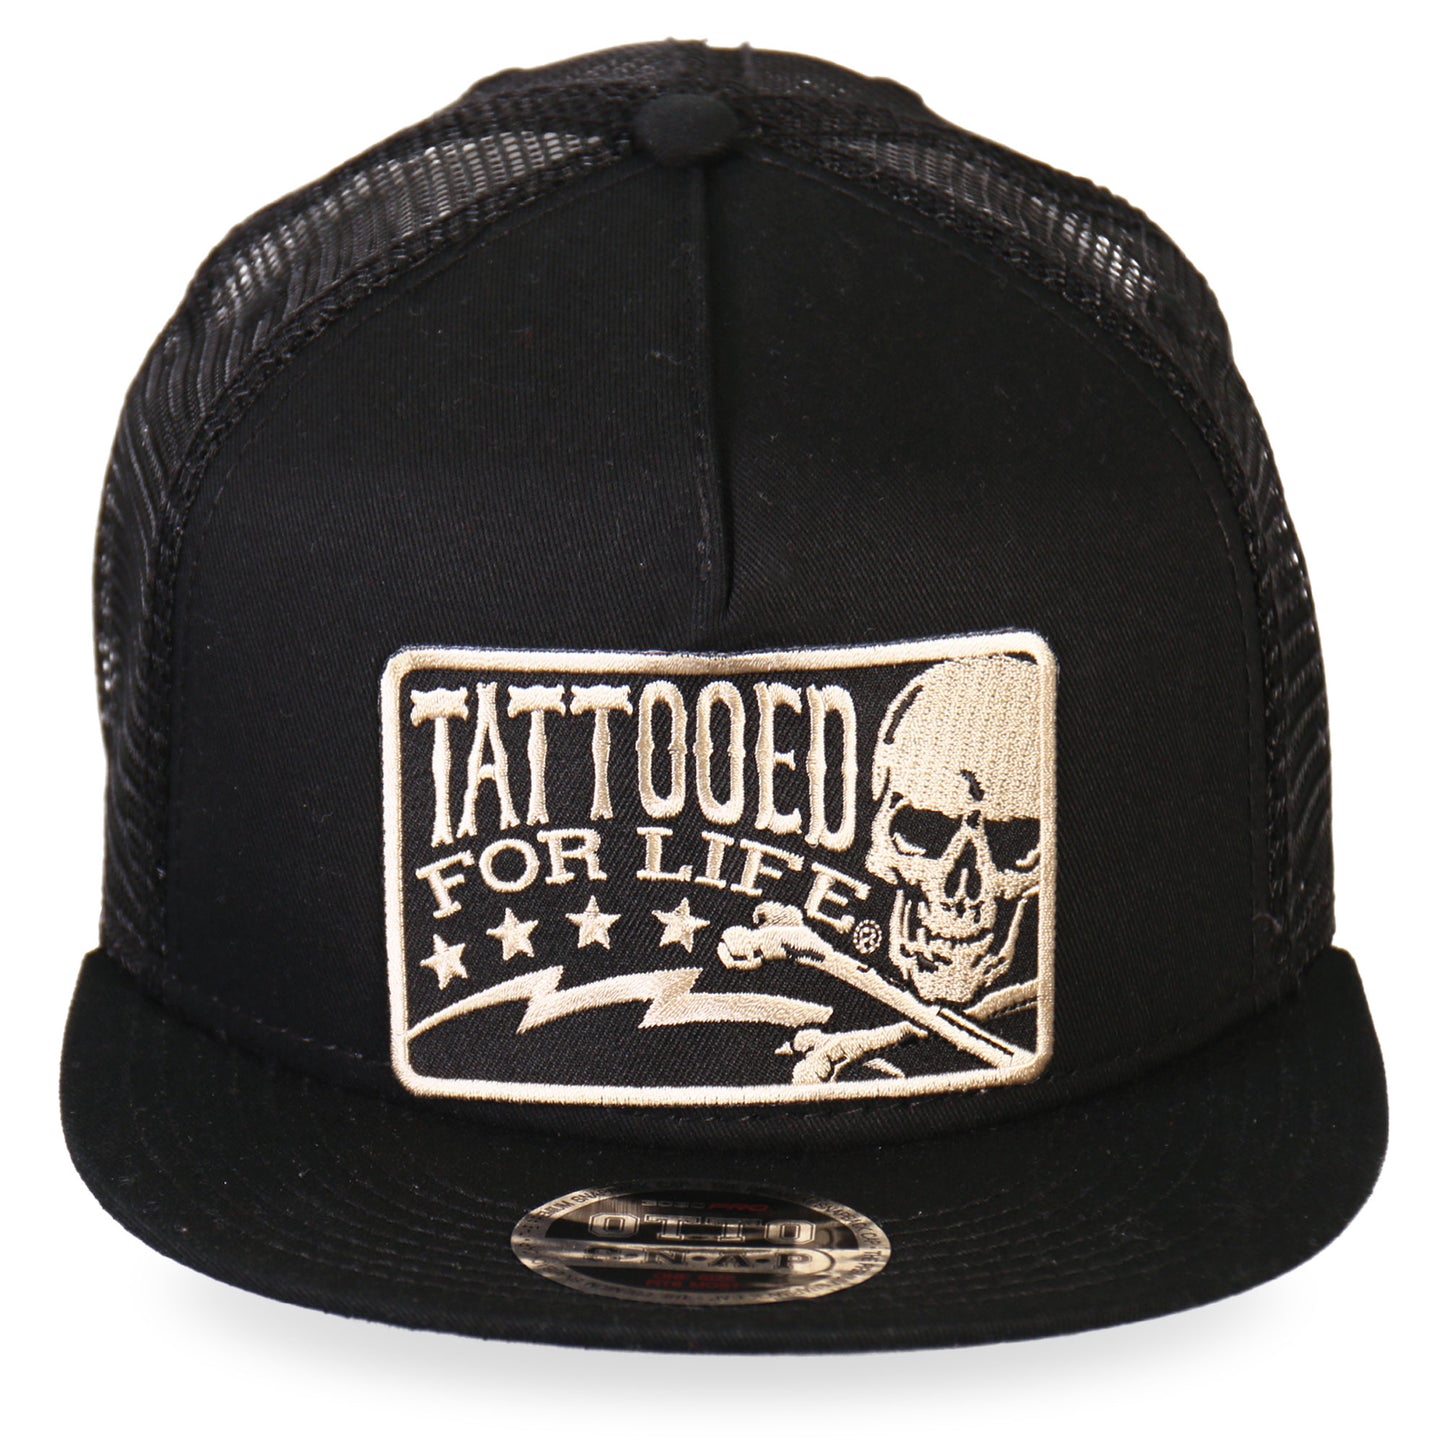 Hot Leathers GSH2003 Tattooed for Life Skull and Bolts Snap Back Hat